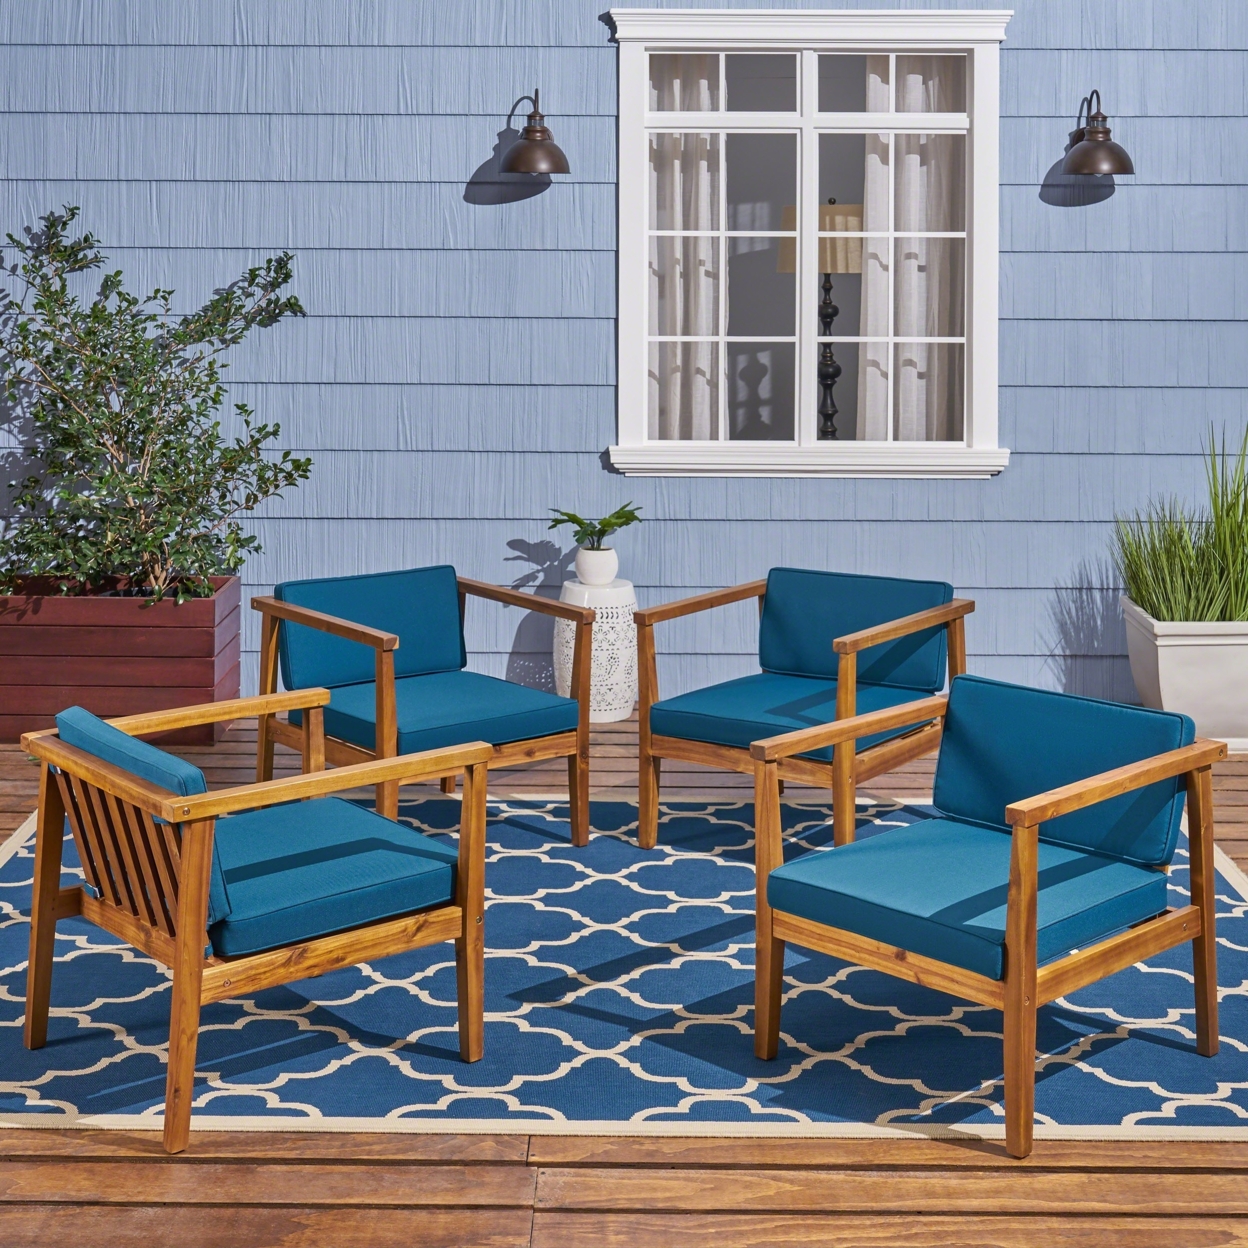 Thomson Outdoor Acacia Wood Club Chairs With Water-Resistant Cushions (Set Of 4) - Teak / Dark Teal